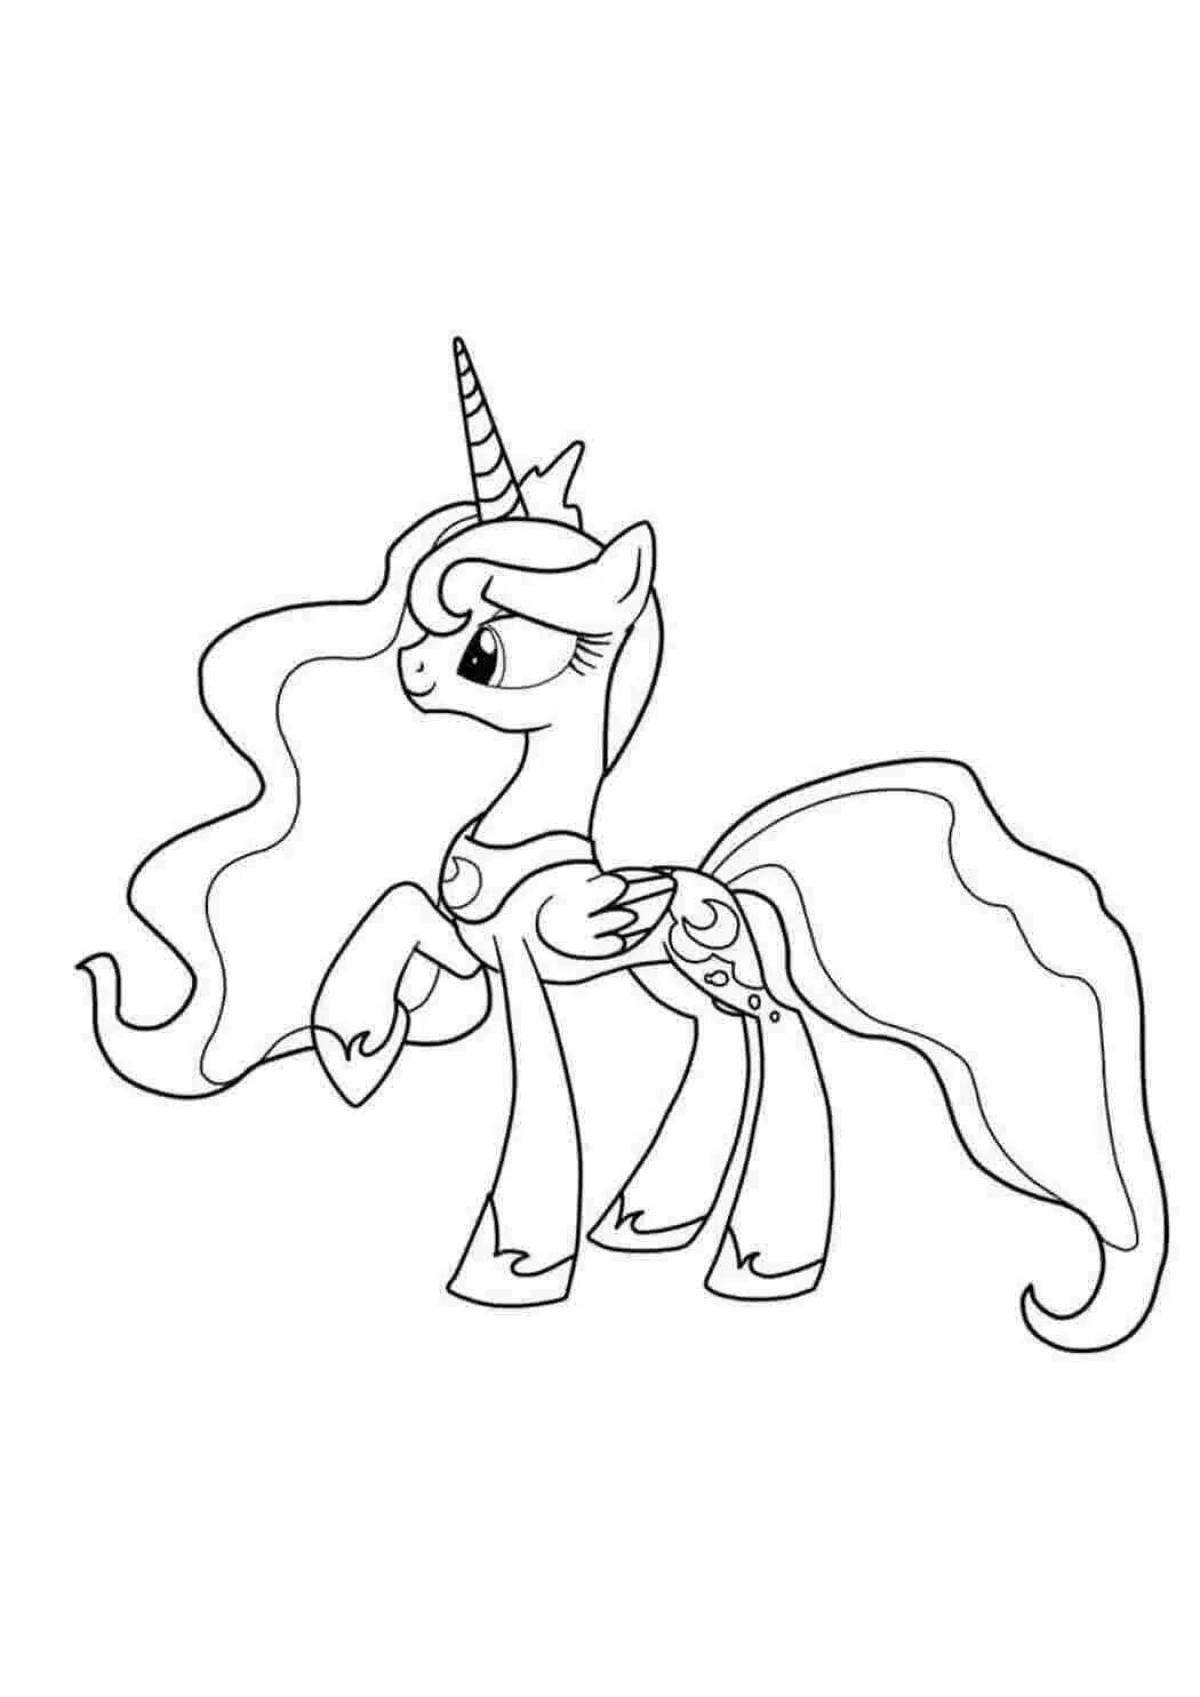 Joyful cute pony coloring pages for kids